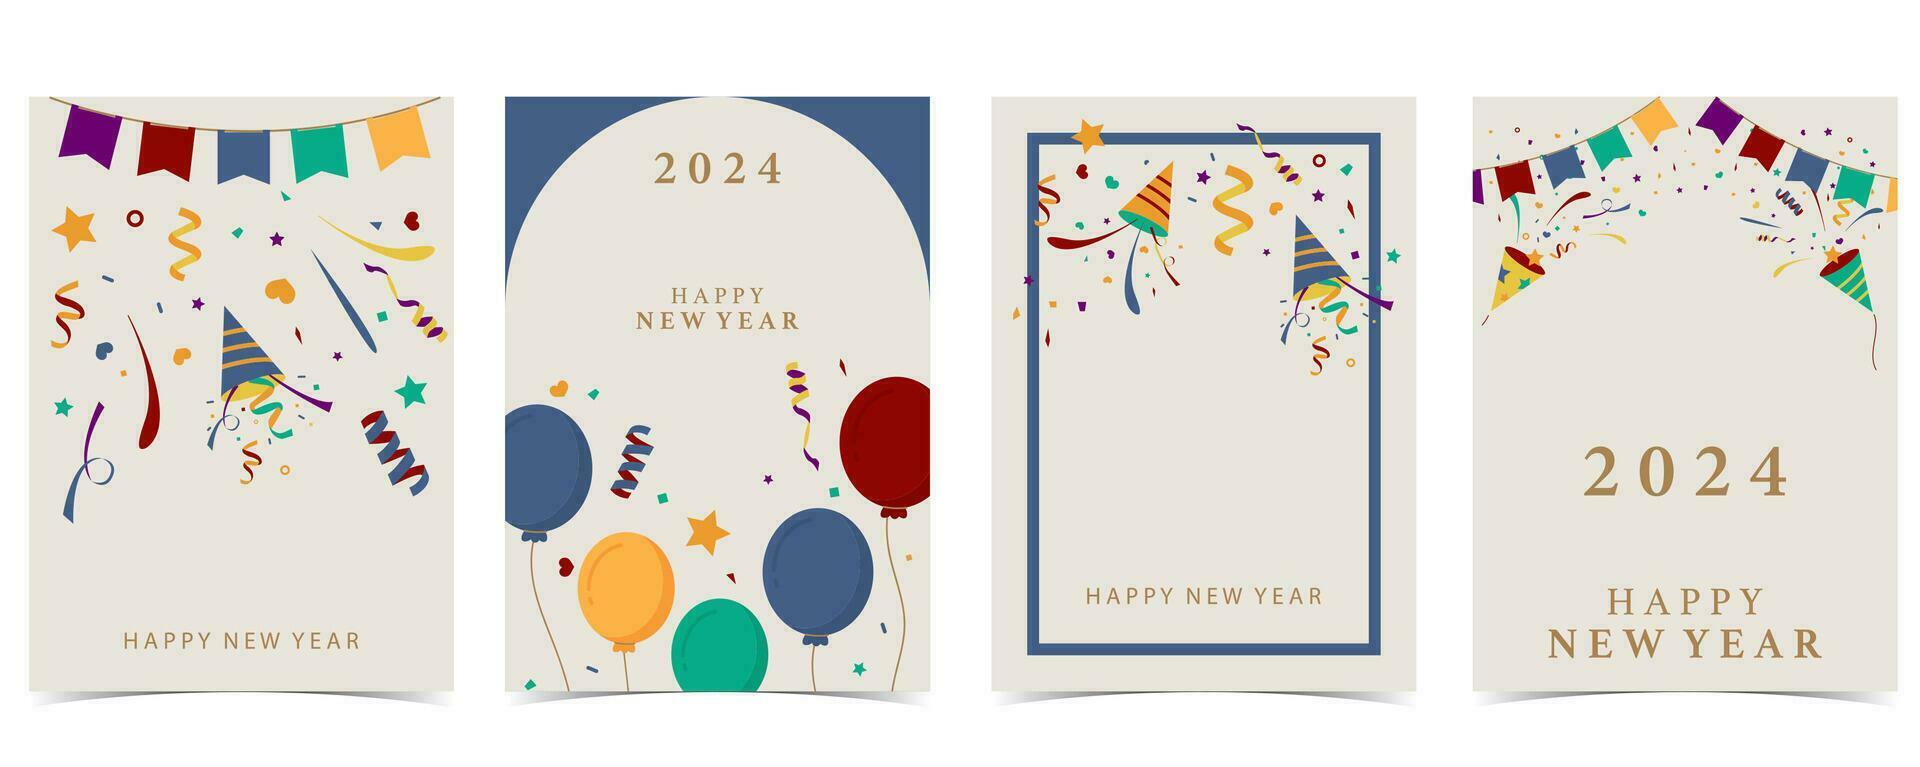 celebrate party background with party popper,glitter..Vector illustration for postcard,banner vector